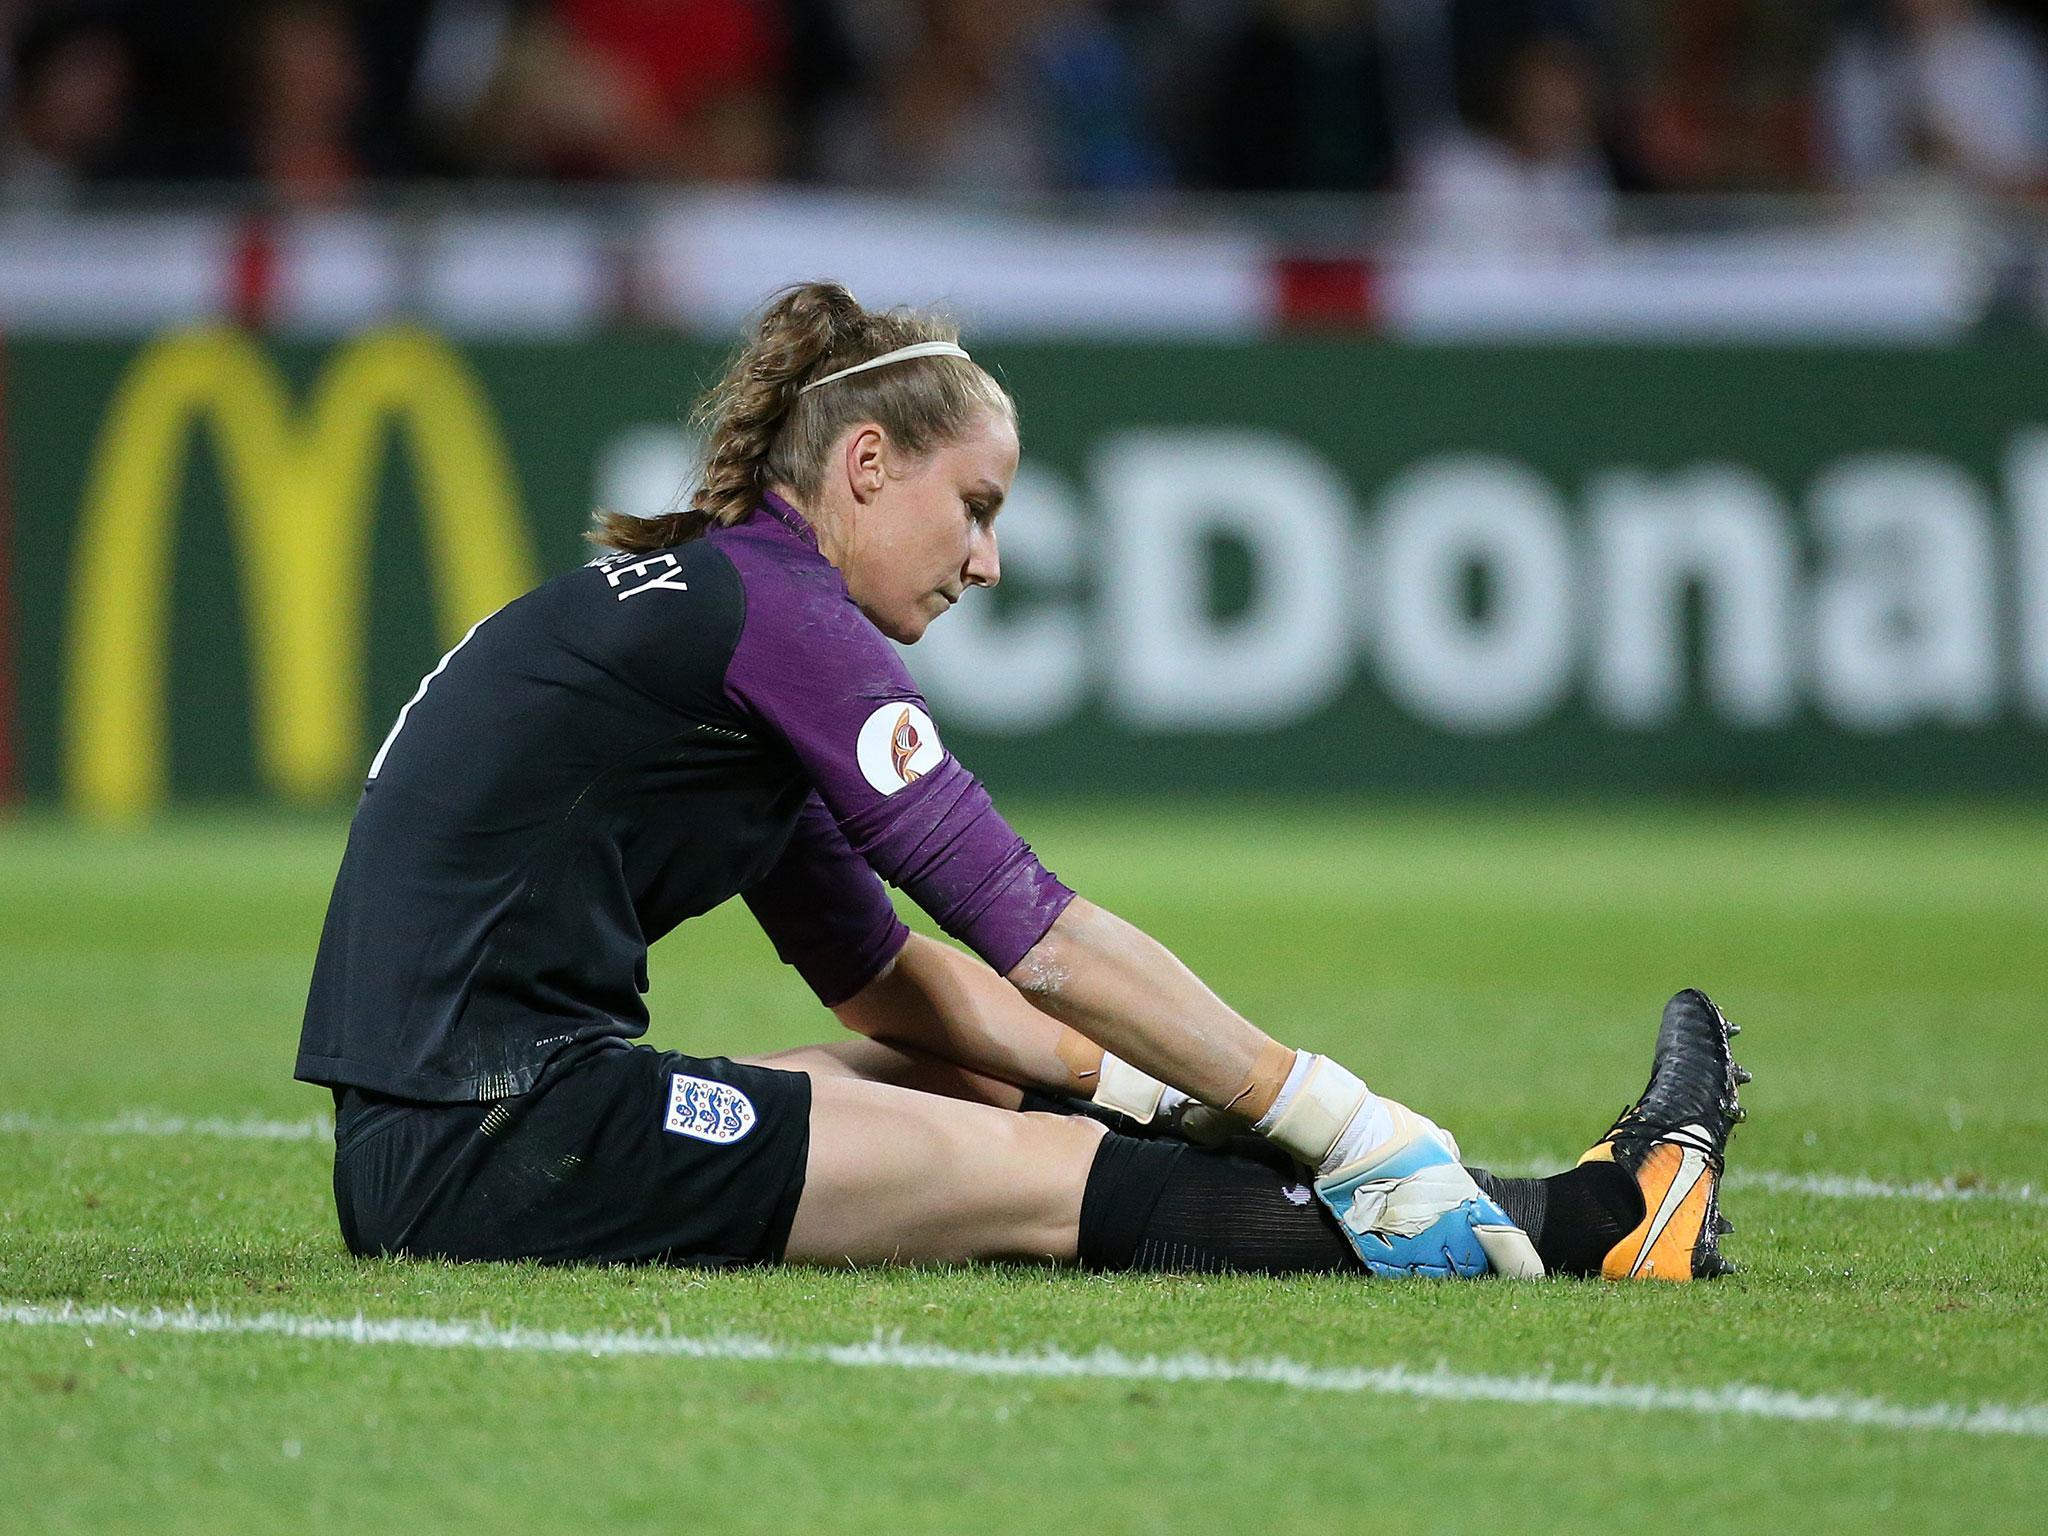 &#13;
Karen Bardsley broke her leg in a collision with her own captain Steph Houghton &#13;